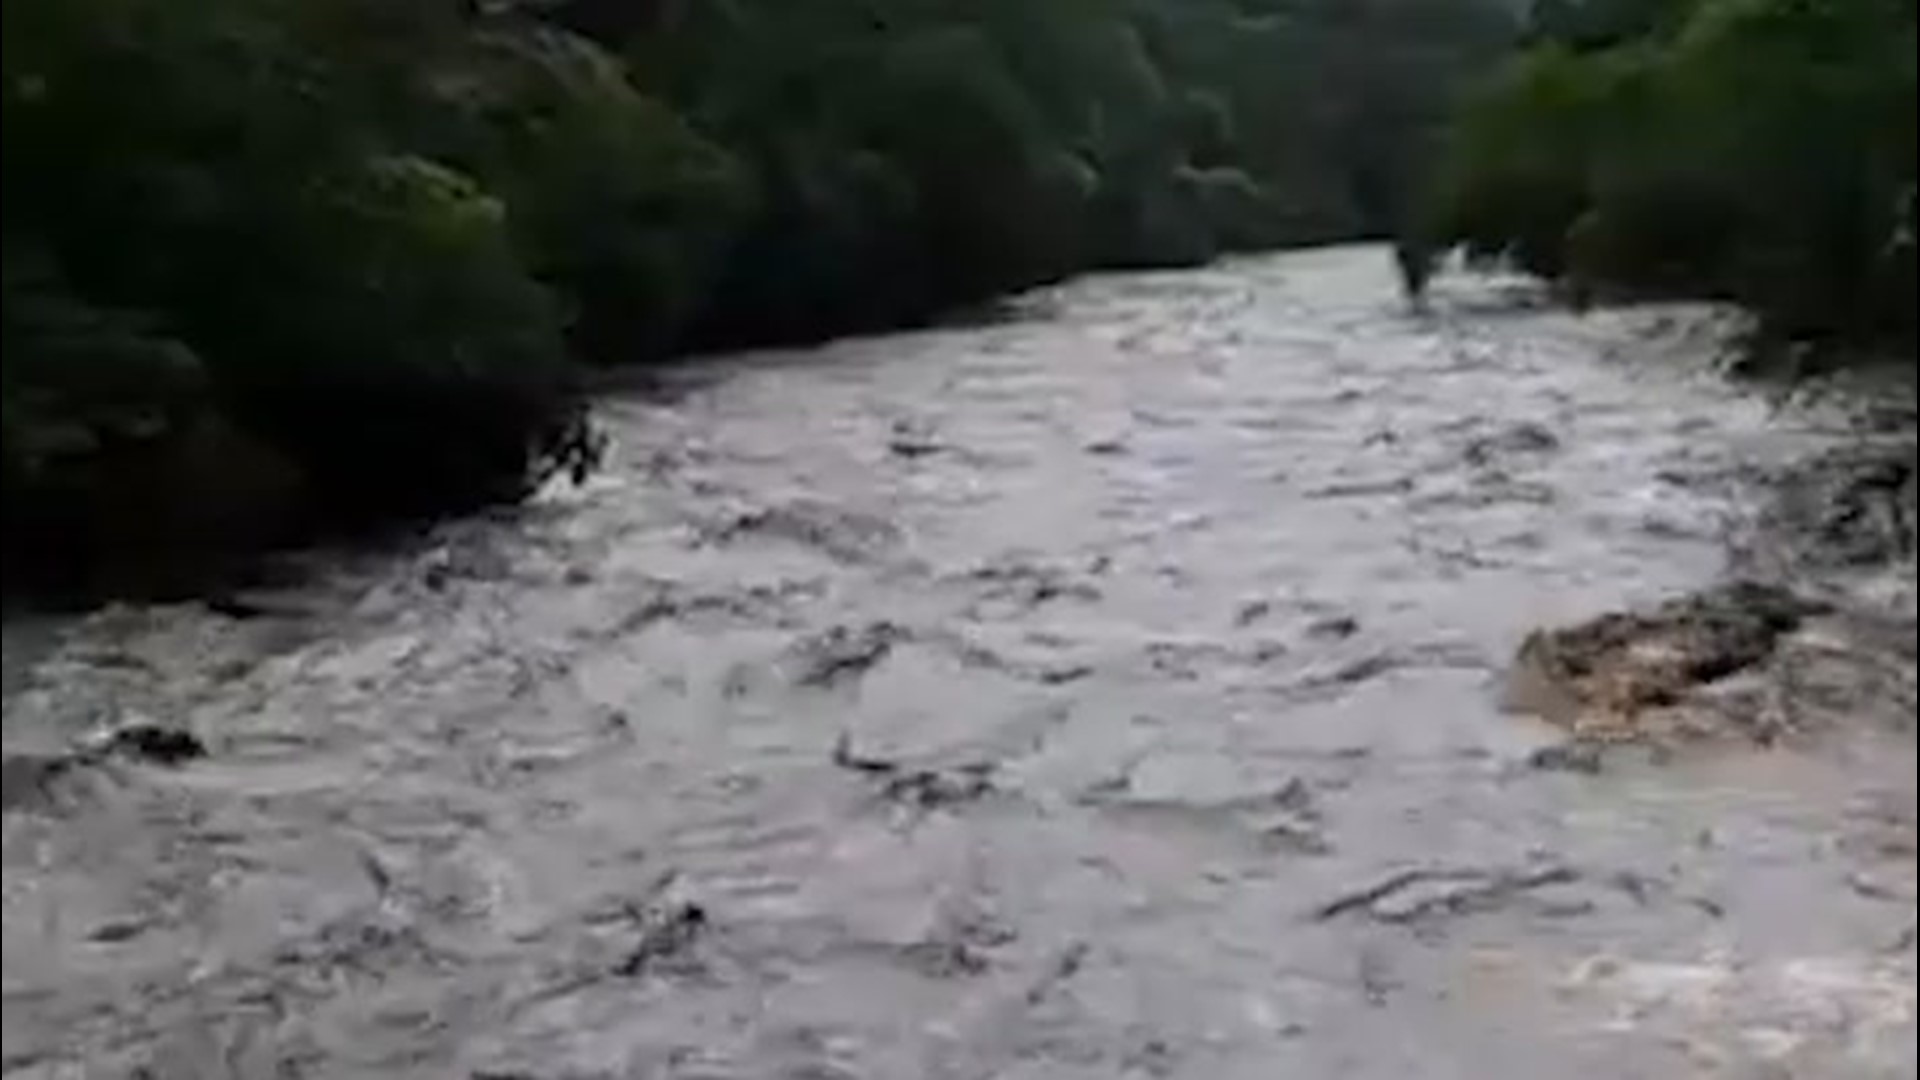 The San Jose River overflowed near Chiquimula, Guatemala, on May 31, resulting in a dangerous, fast-flowing current.